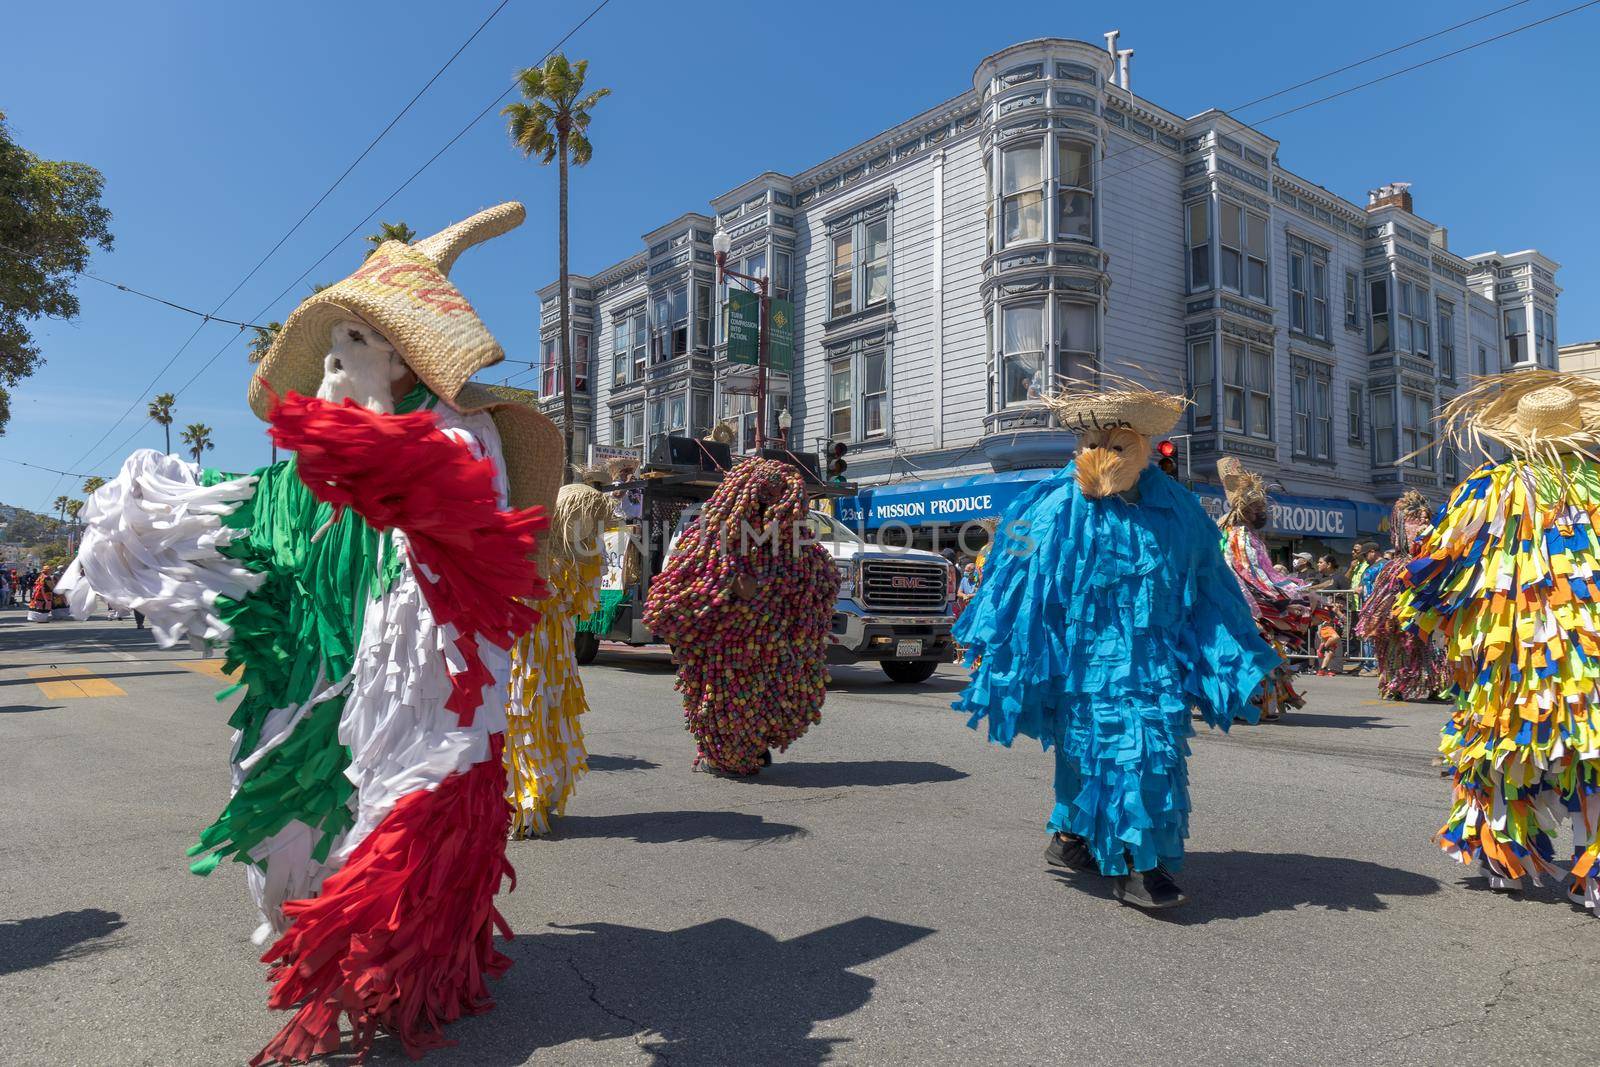 Members of the Carnaval Putleco in Oaxaca perform during the 44th Annual Carnaval in San Francisco, CA. by timo043850